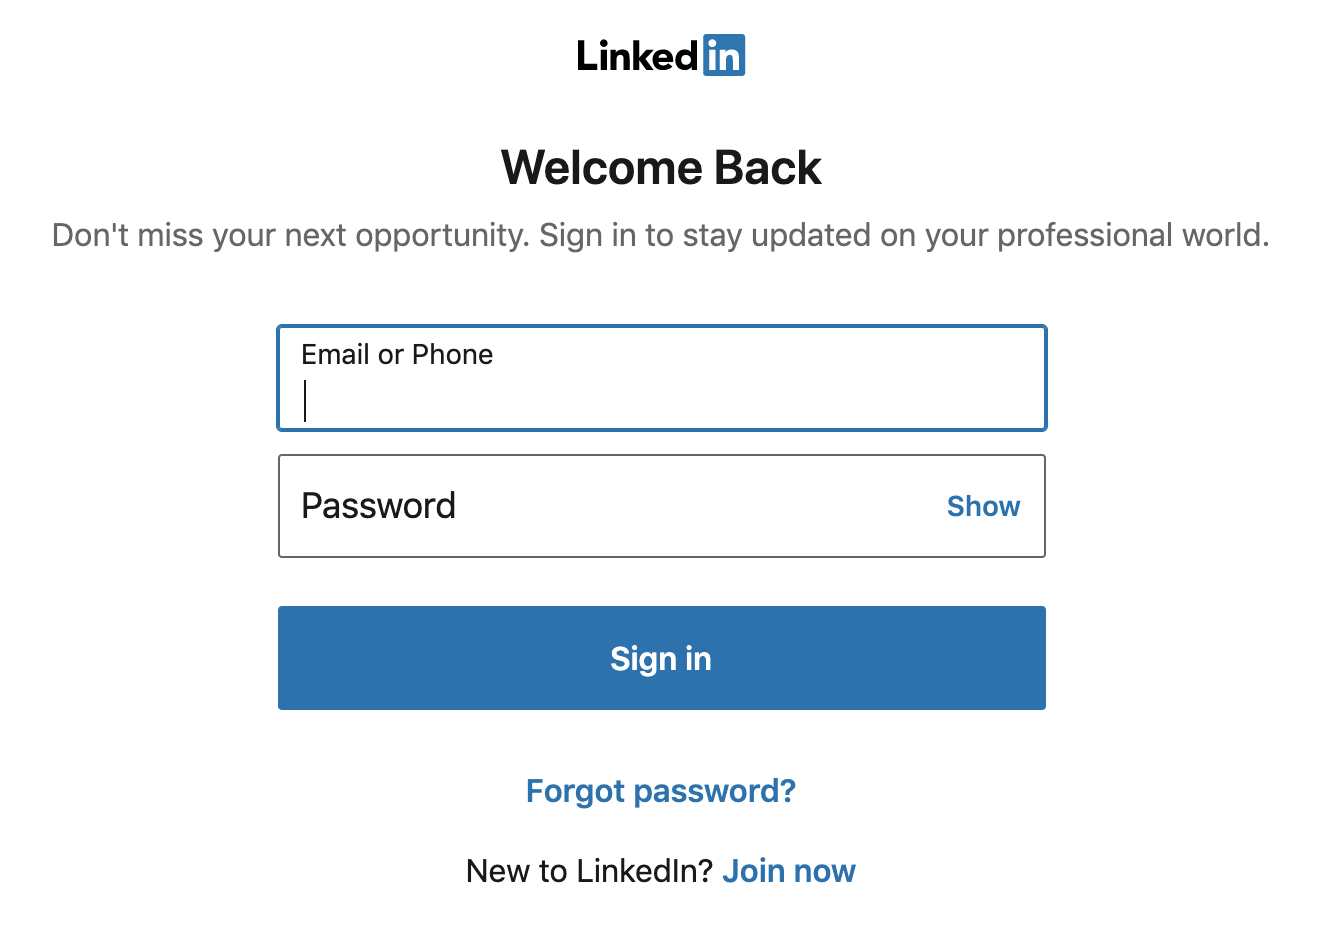 linkedin campaign manager